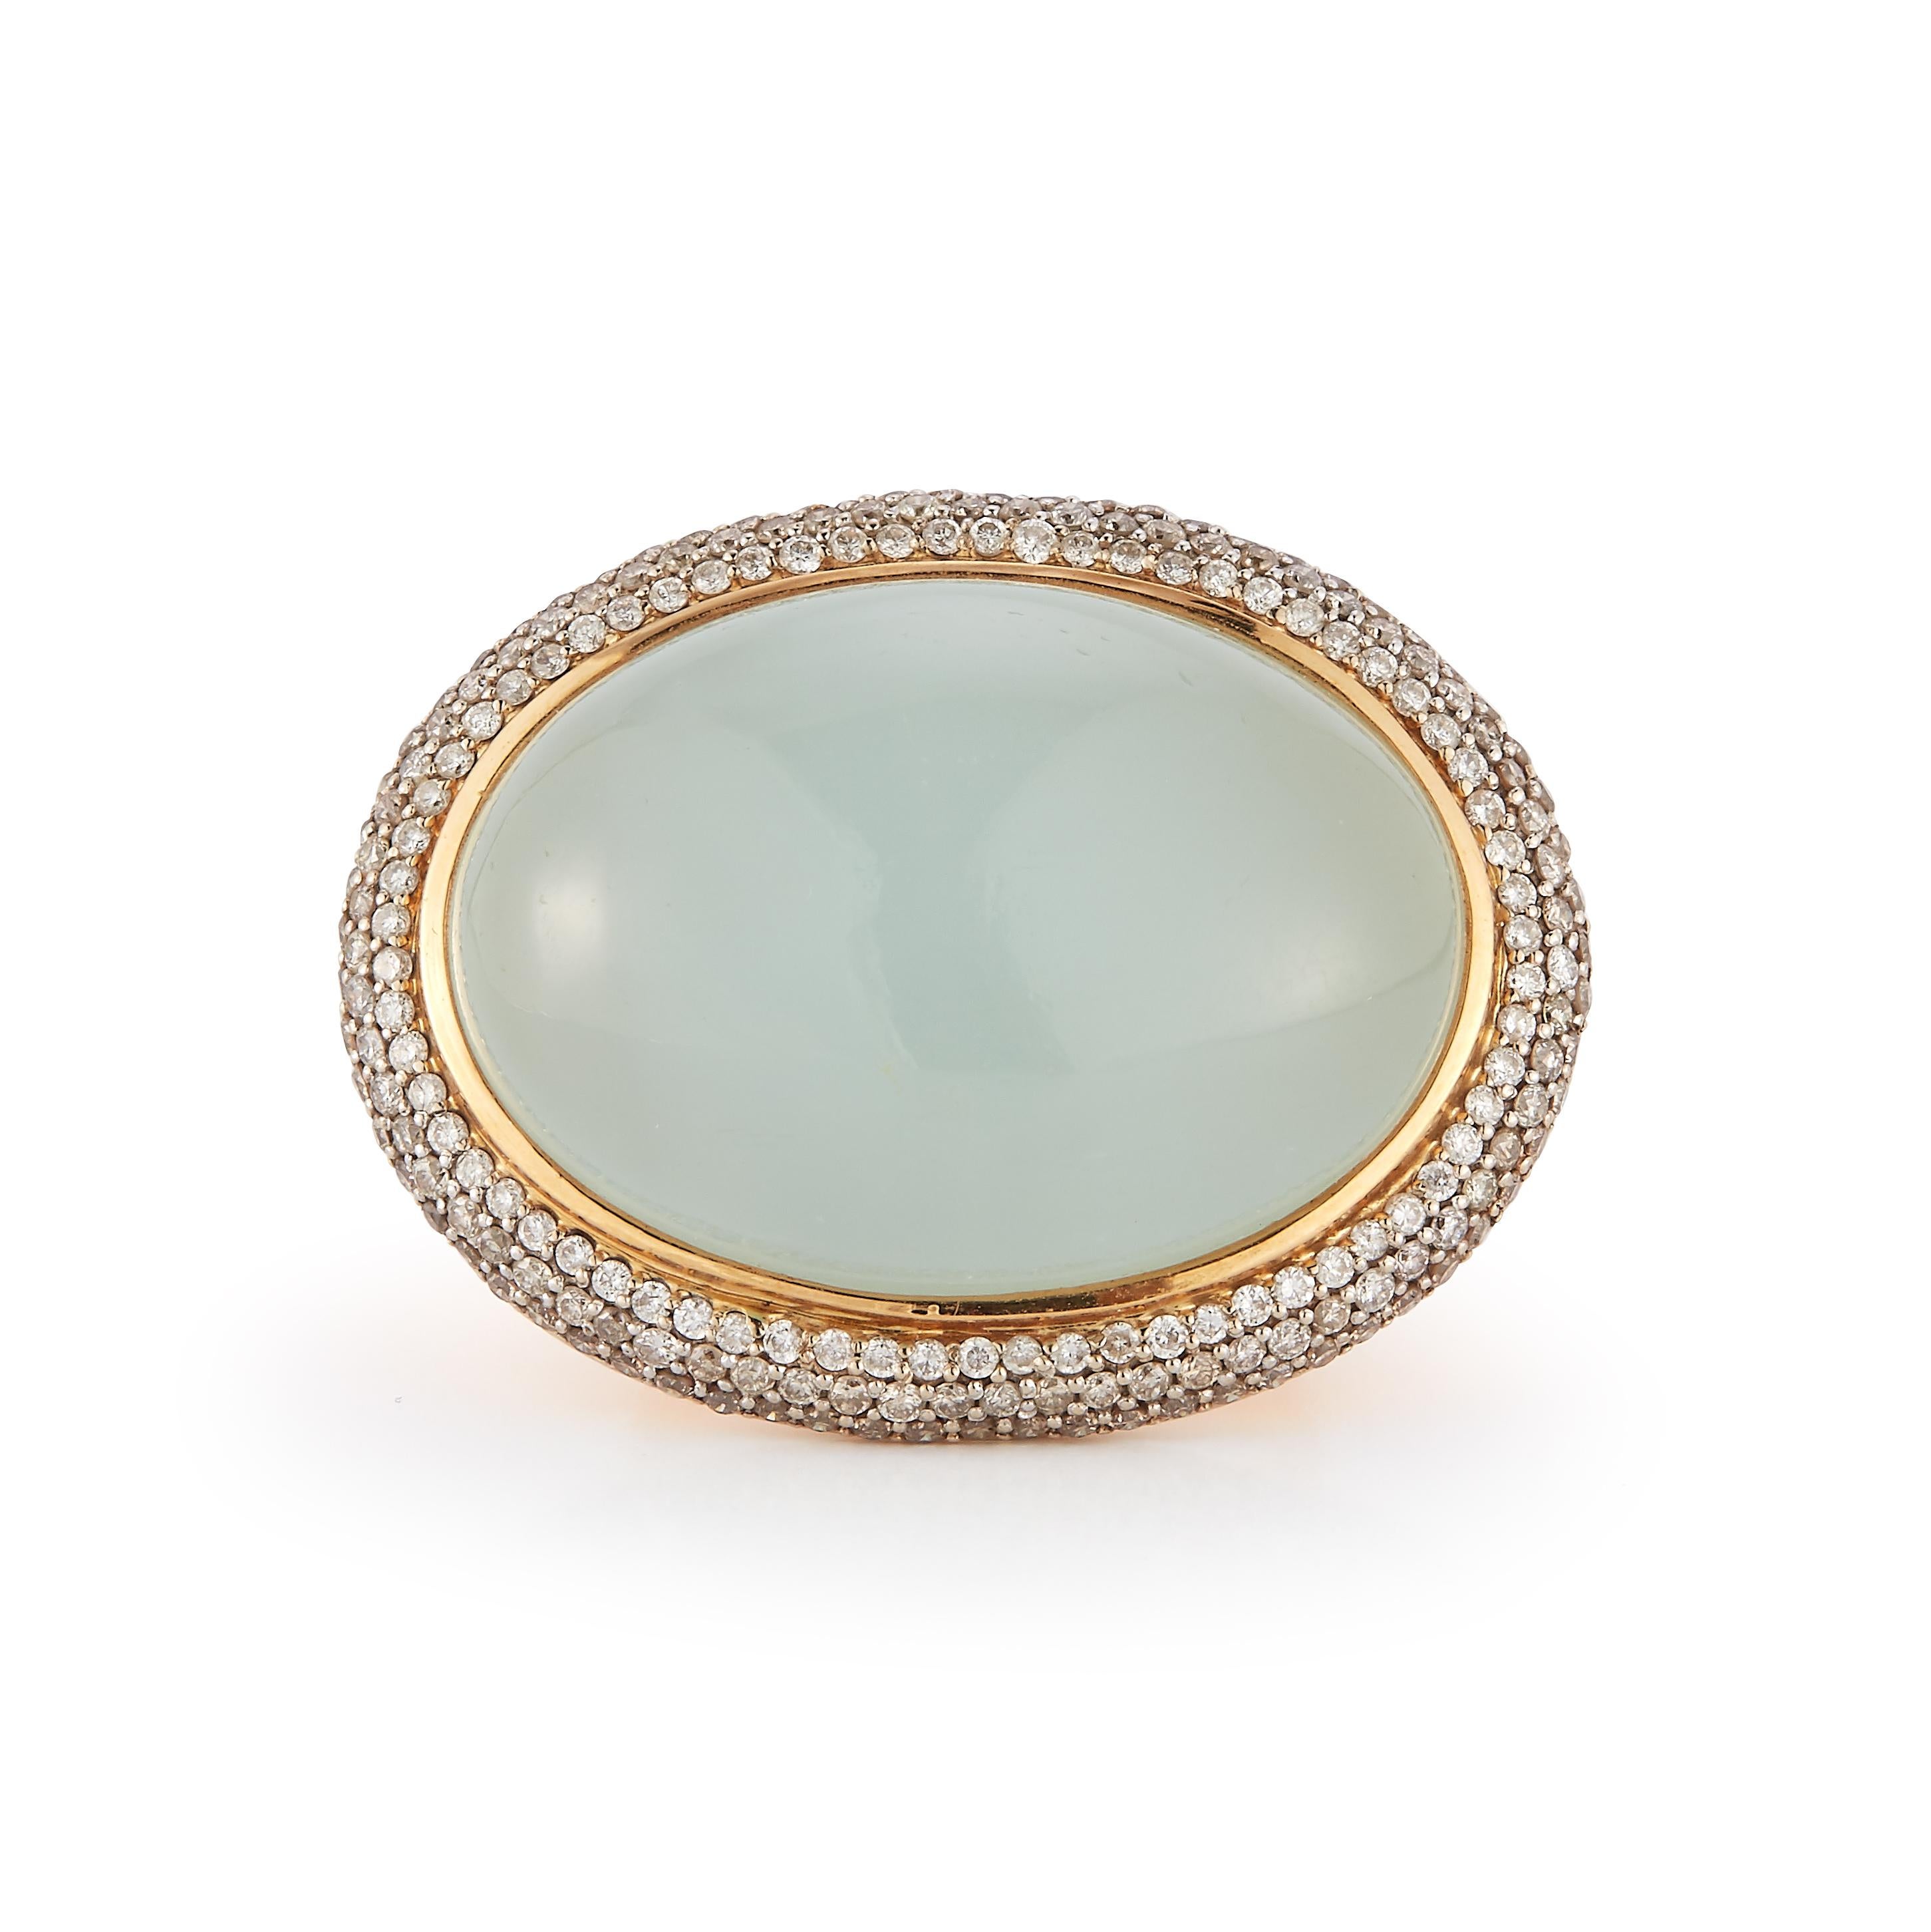 Parulina Couture Fine Jewelry- Aquamarine and Diamond Ring from the Isle of Capri Collection.
This stunningly large Aquamarine is 40.47ct and has a Diamond border of 1.49ct.
Set in 18K Yellow Gold.
Size 6 

Metal: 18K Yellow Gold
Gemstone Carat